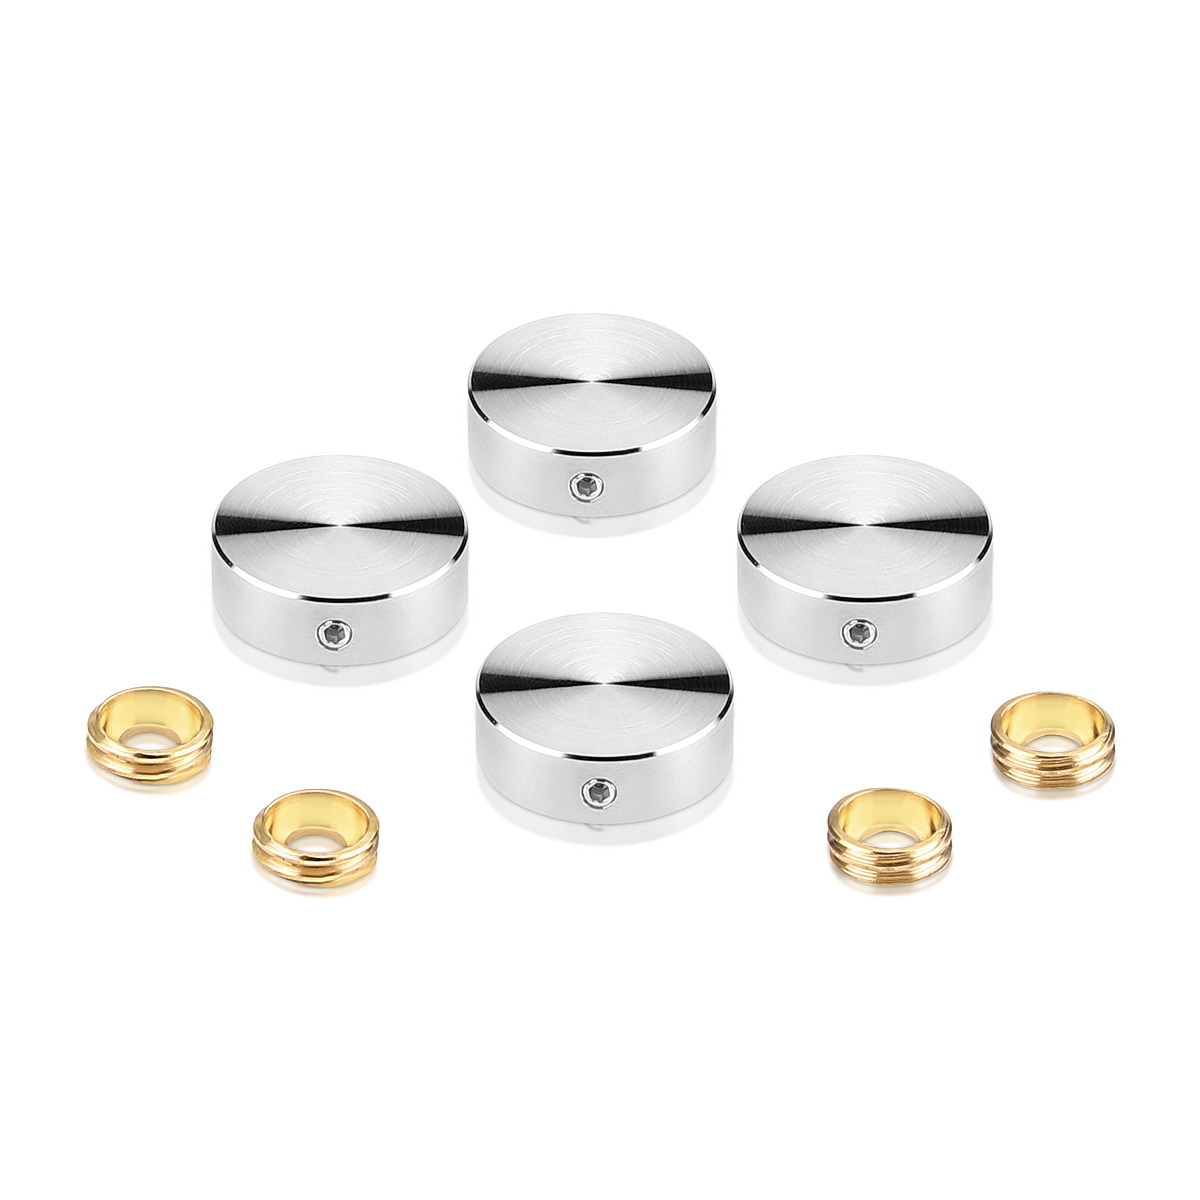 Set of 4 Locking Screw Cover Diameter 7/8'', Satin Brushed Stainless Steel Finish (Indoor or Outdoor)